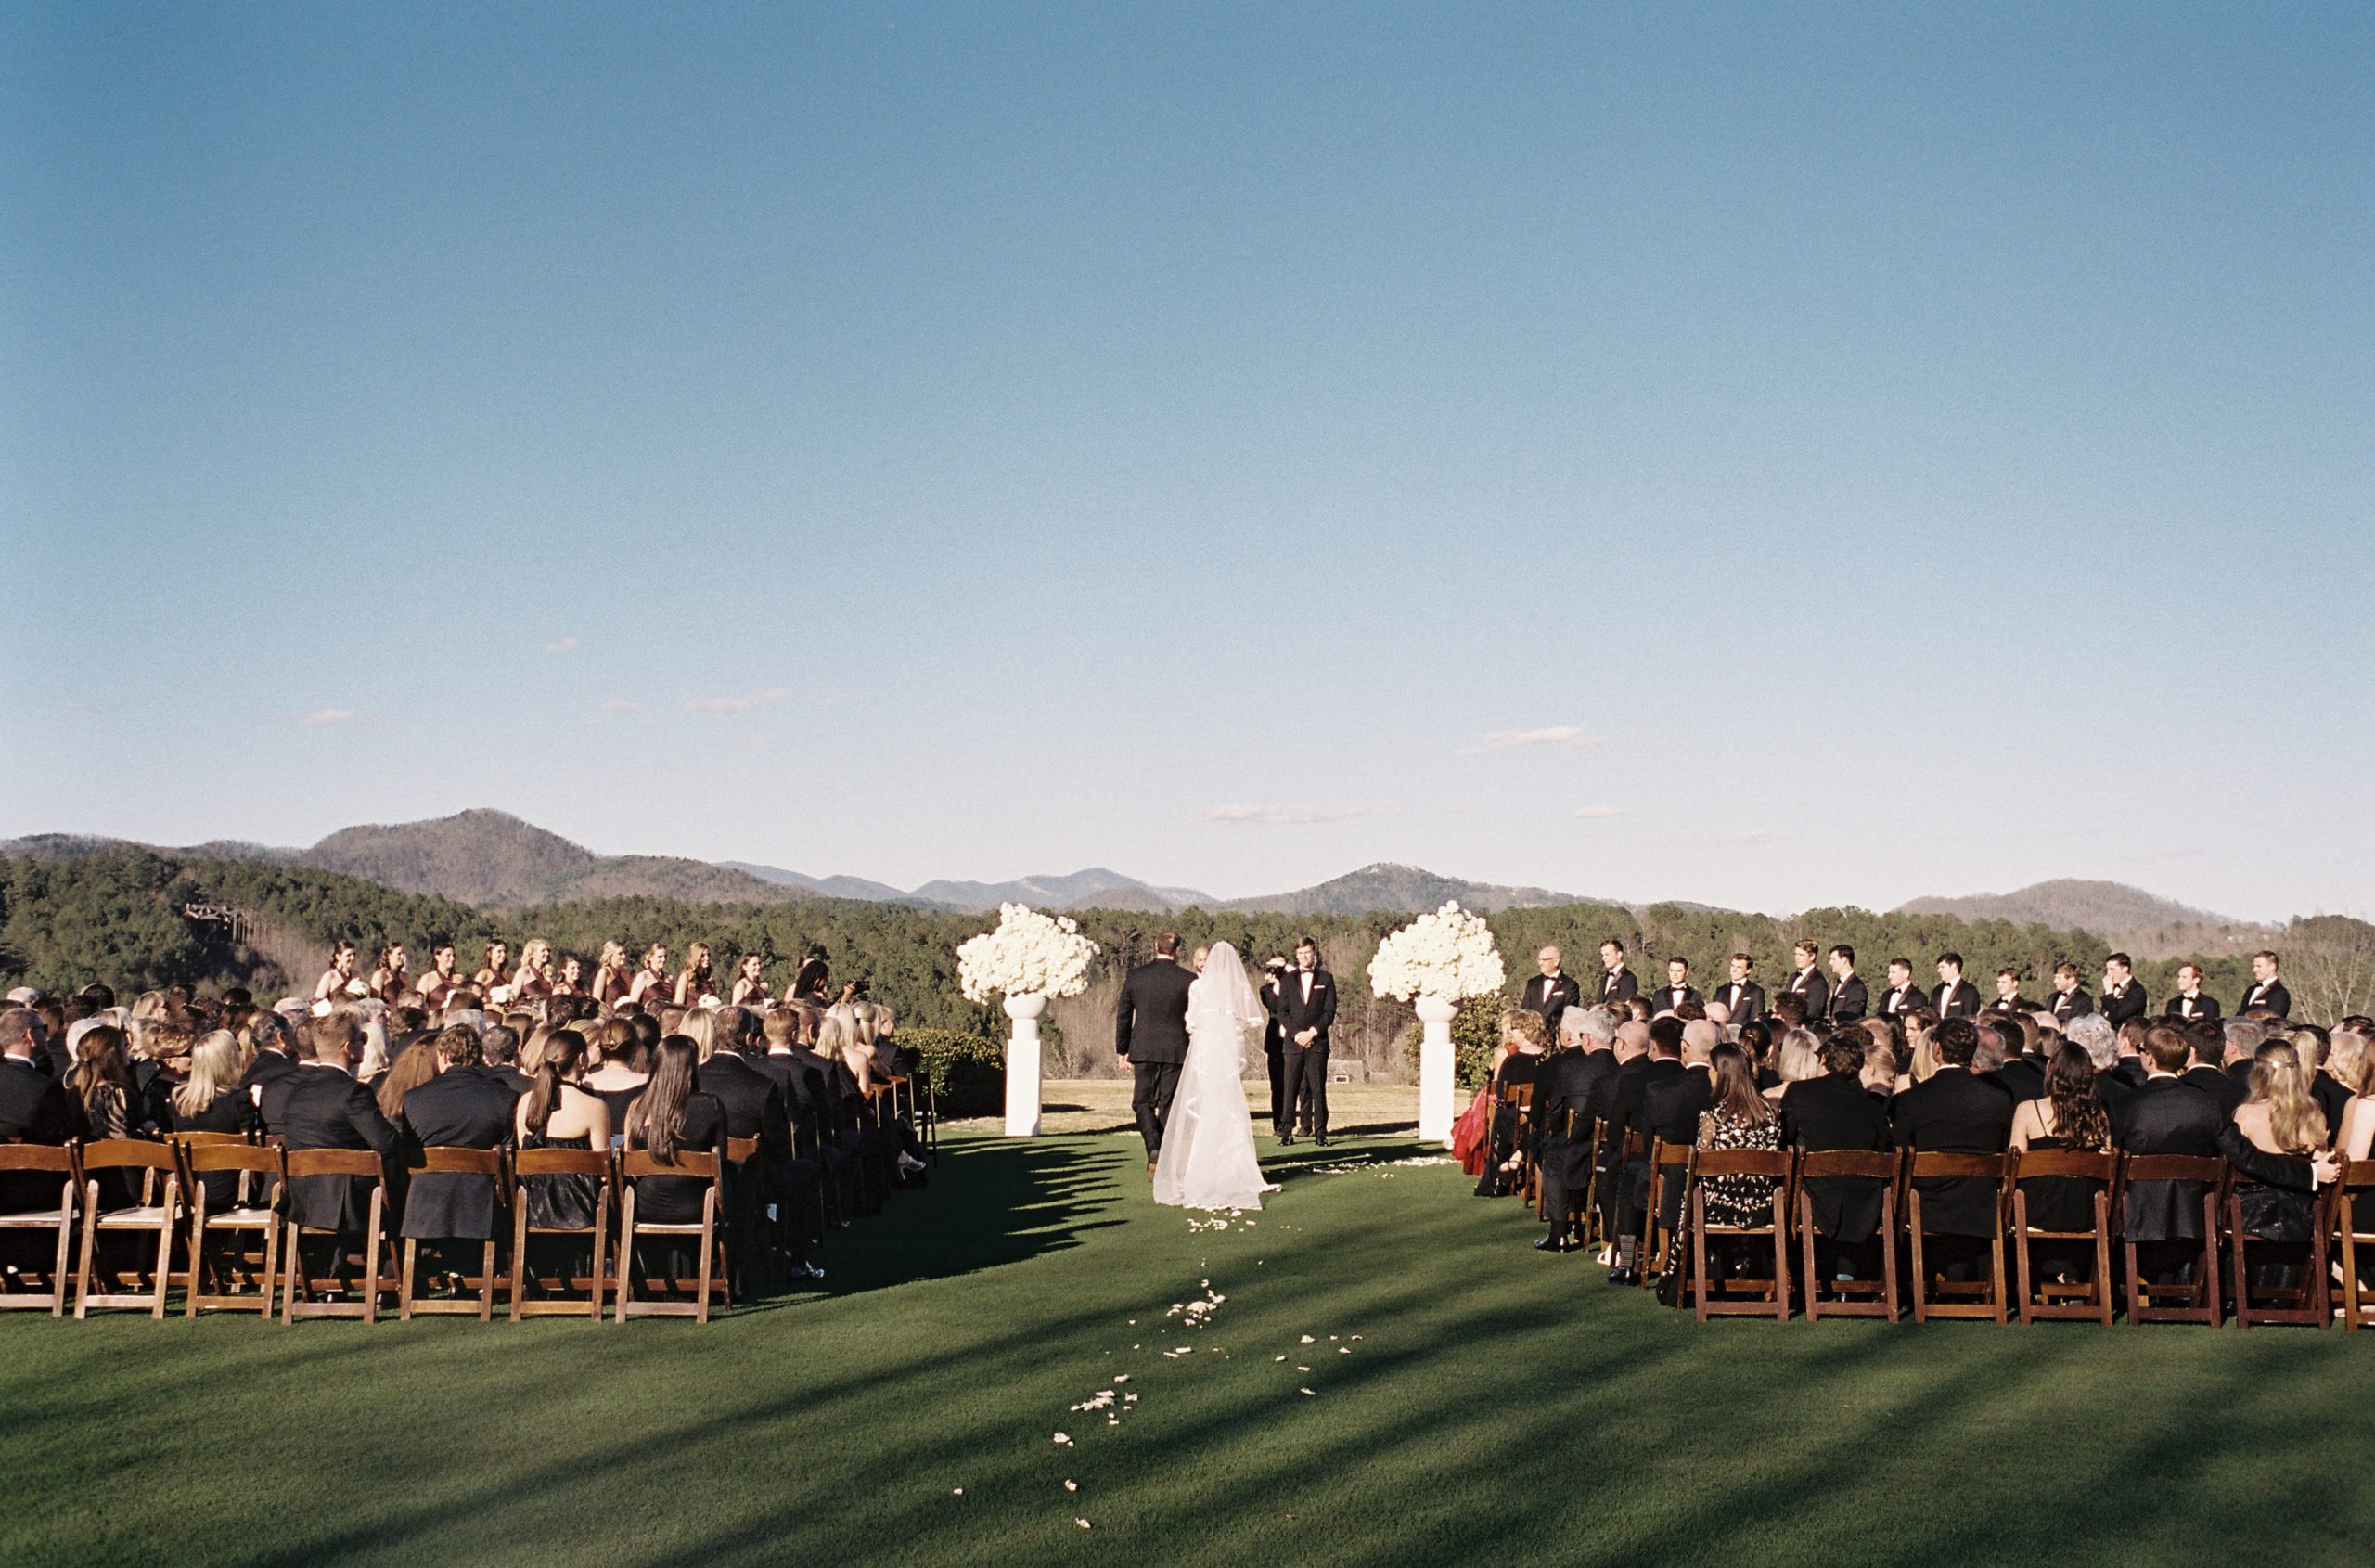  The ceremony was held on the croquet lawn at the Reserve at Lake Keowee overlooking the mountain skyline. It was officiated by Stephen Dinkins, Sutton’s uncle, who is a missionary in Kenya, and David Gentino, Sutton’s pastor at Columbia Presbyterian Church. 